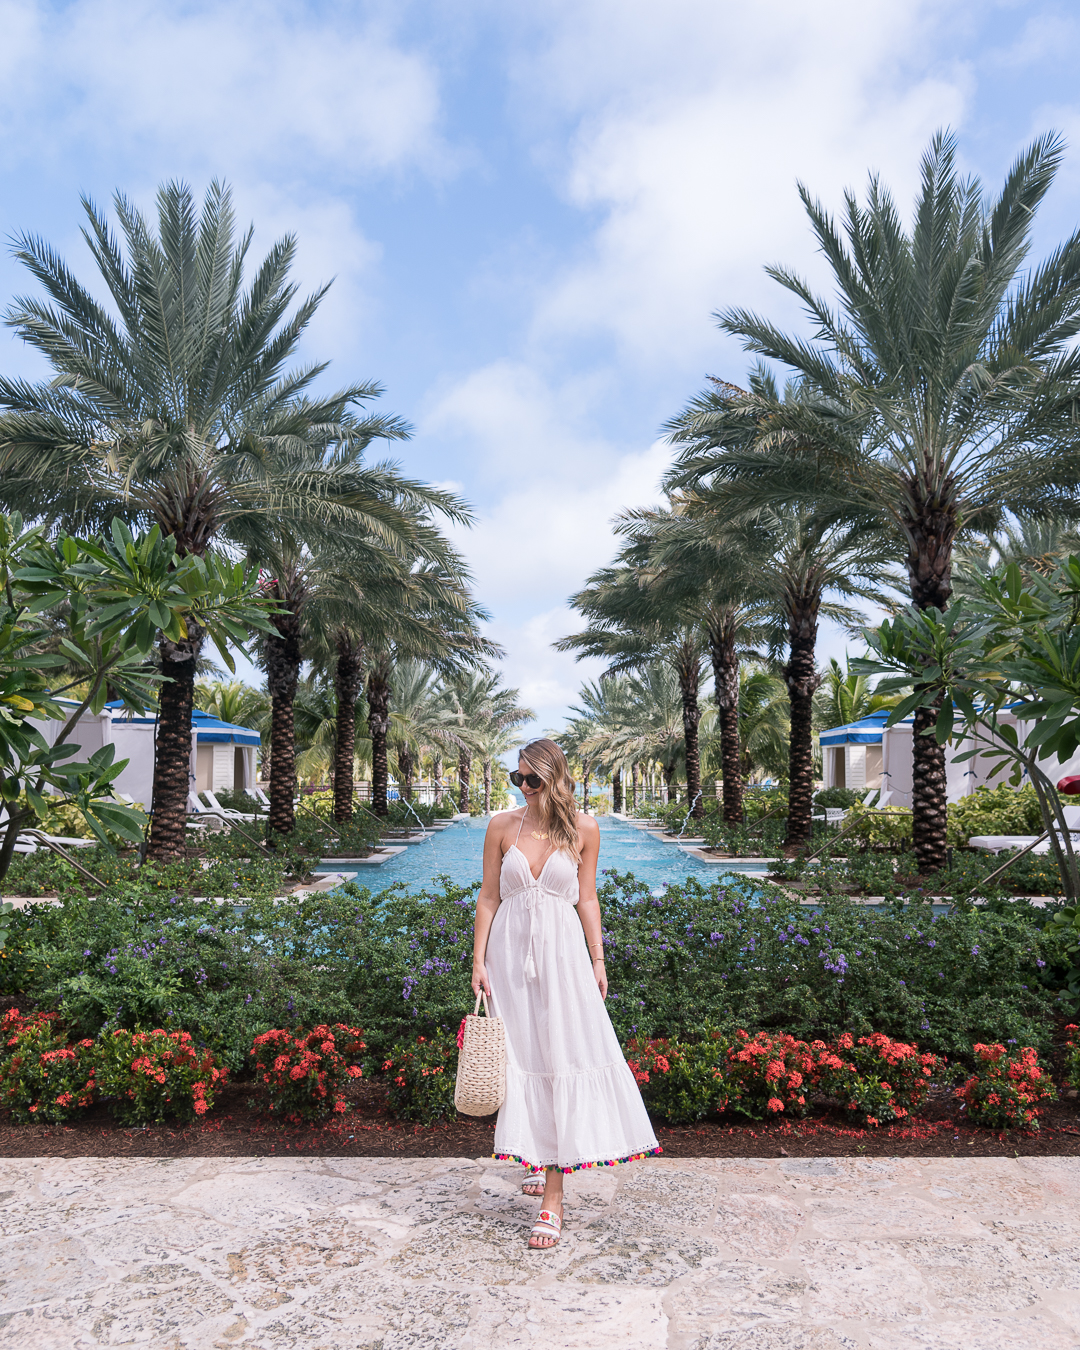 baha mar resort review in the bahamas by popular Chicago travel blogger Visions of Vogue